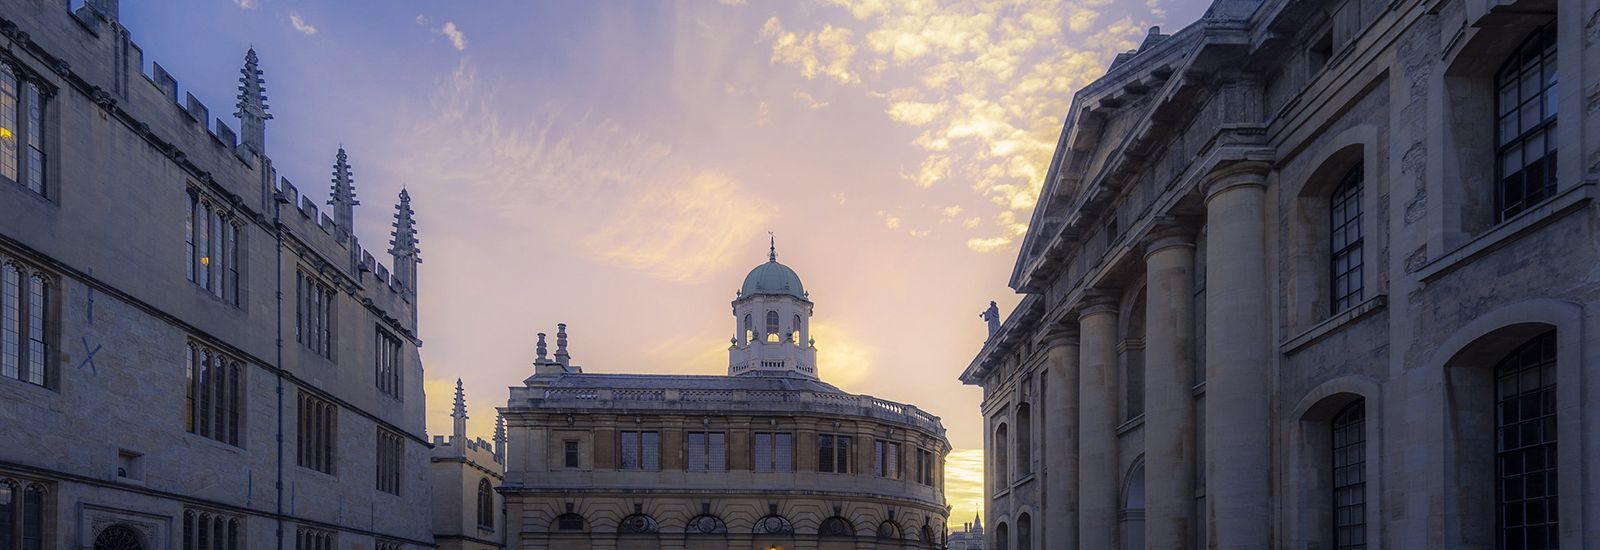 The Bodleian, Sheldonian and Clarendon buildings at sunset 